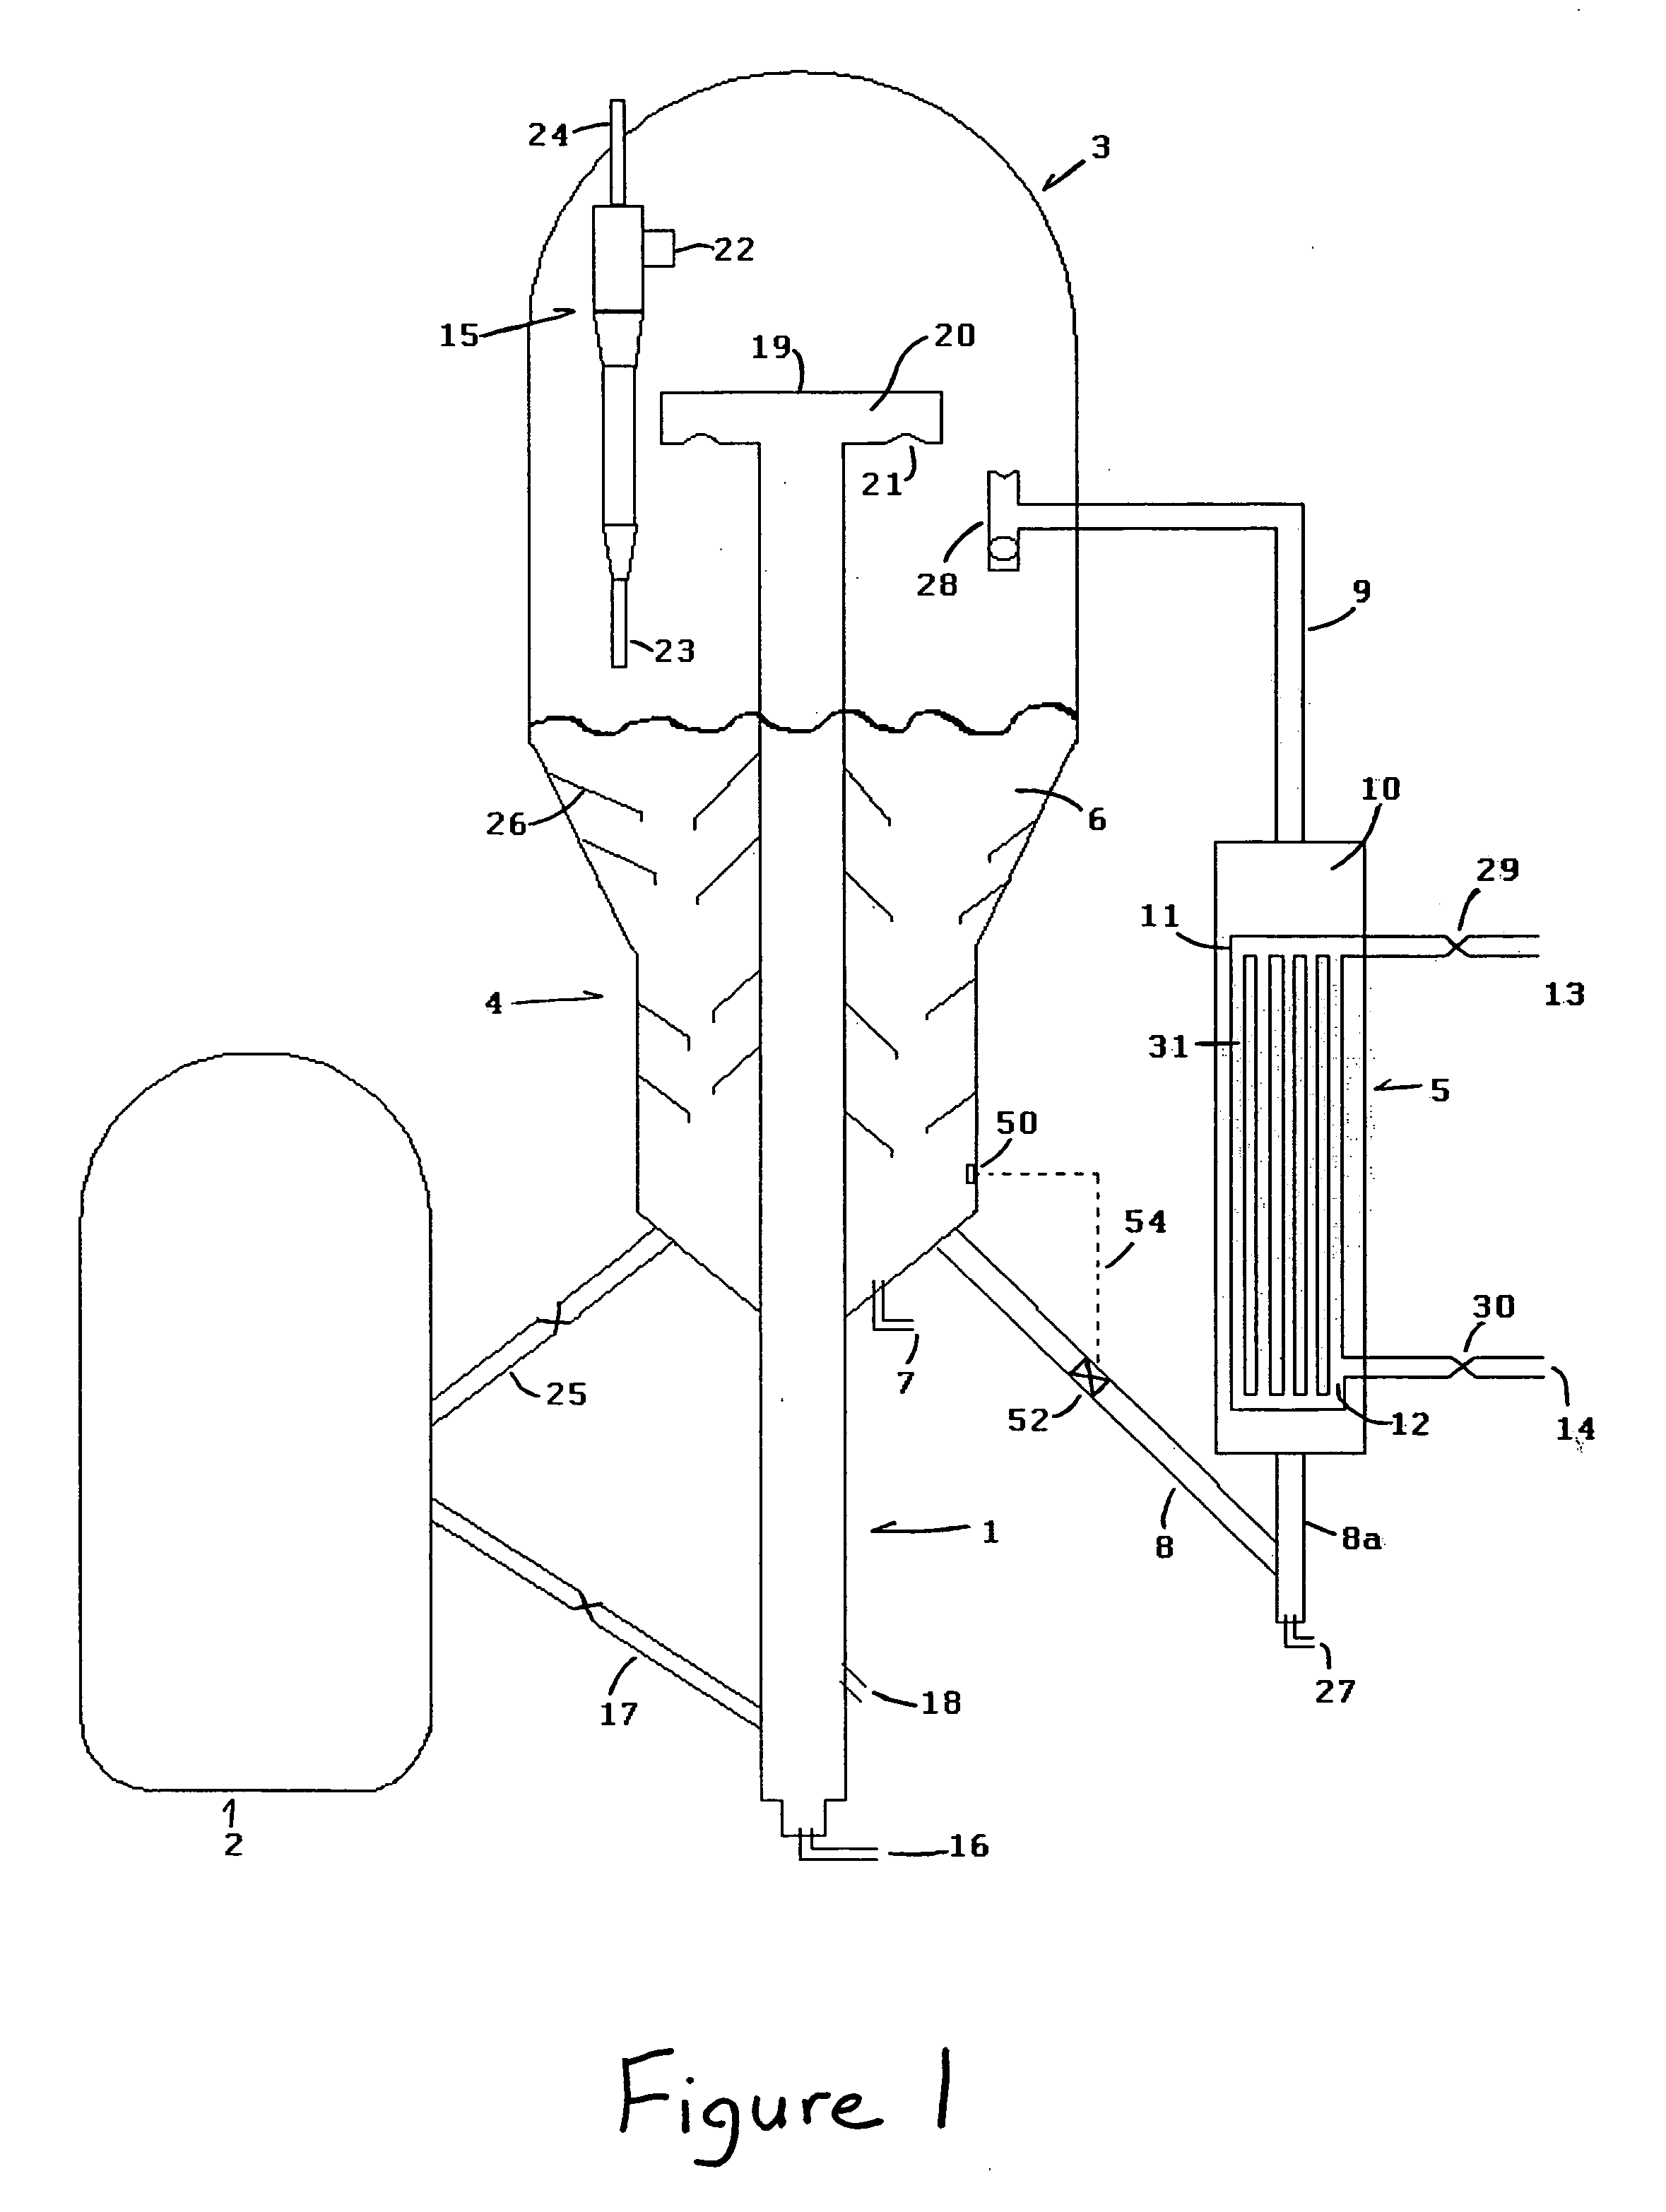 Process and apparatus for controlling catalyst temperature in a catalyst stripper